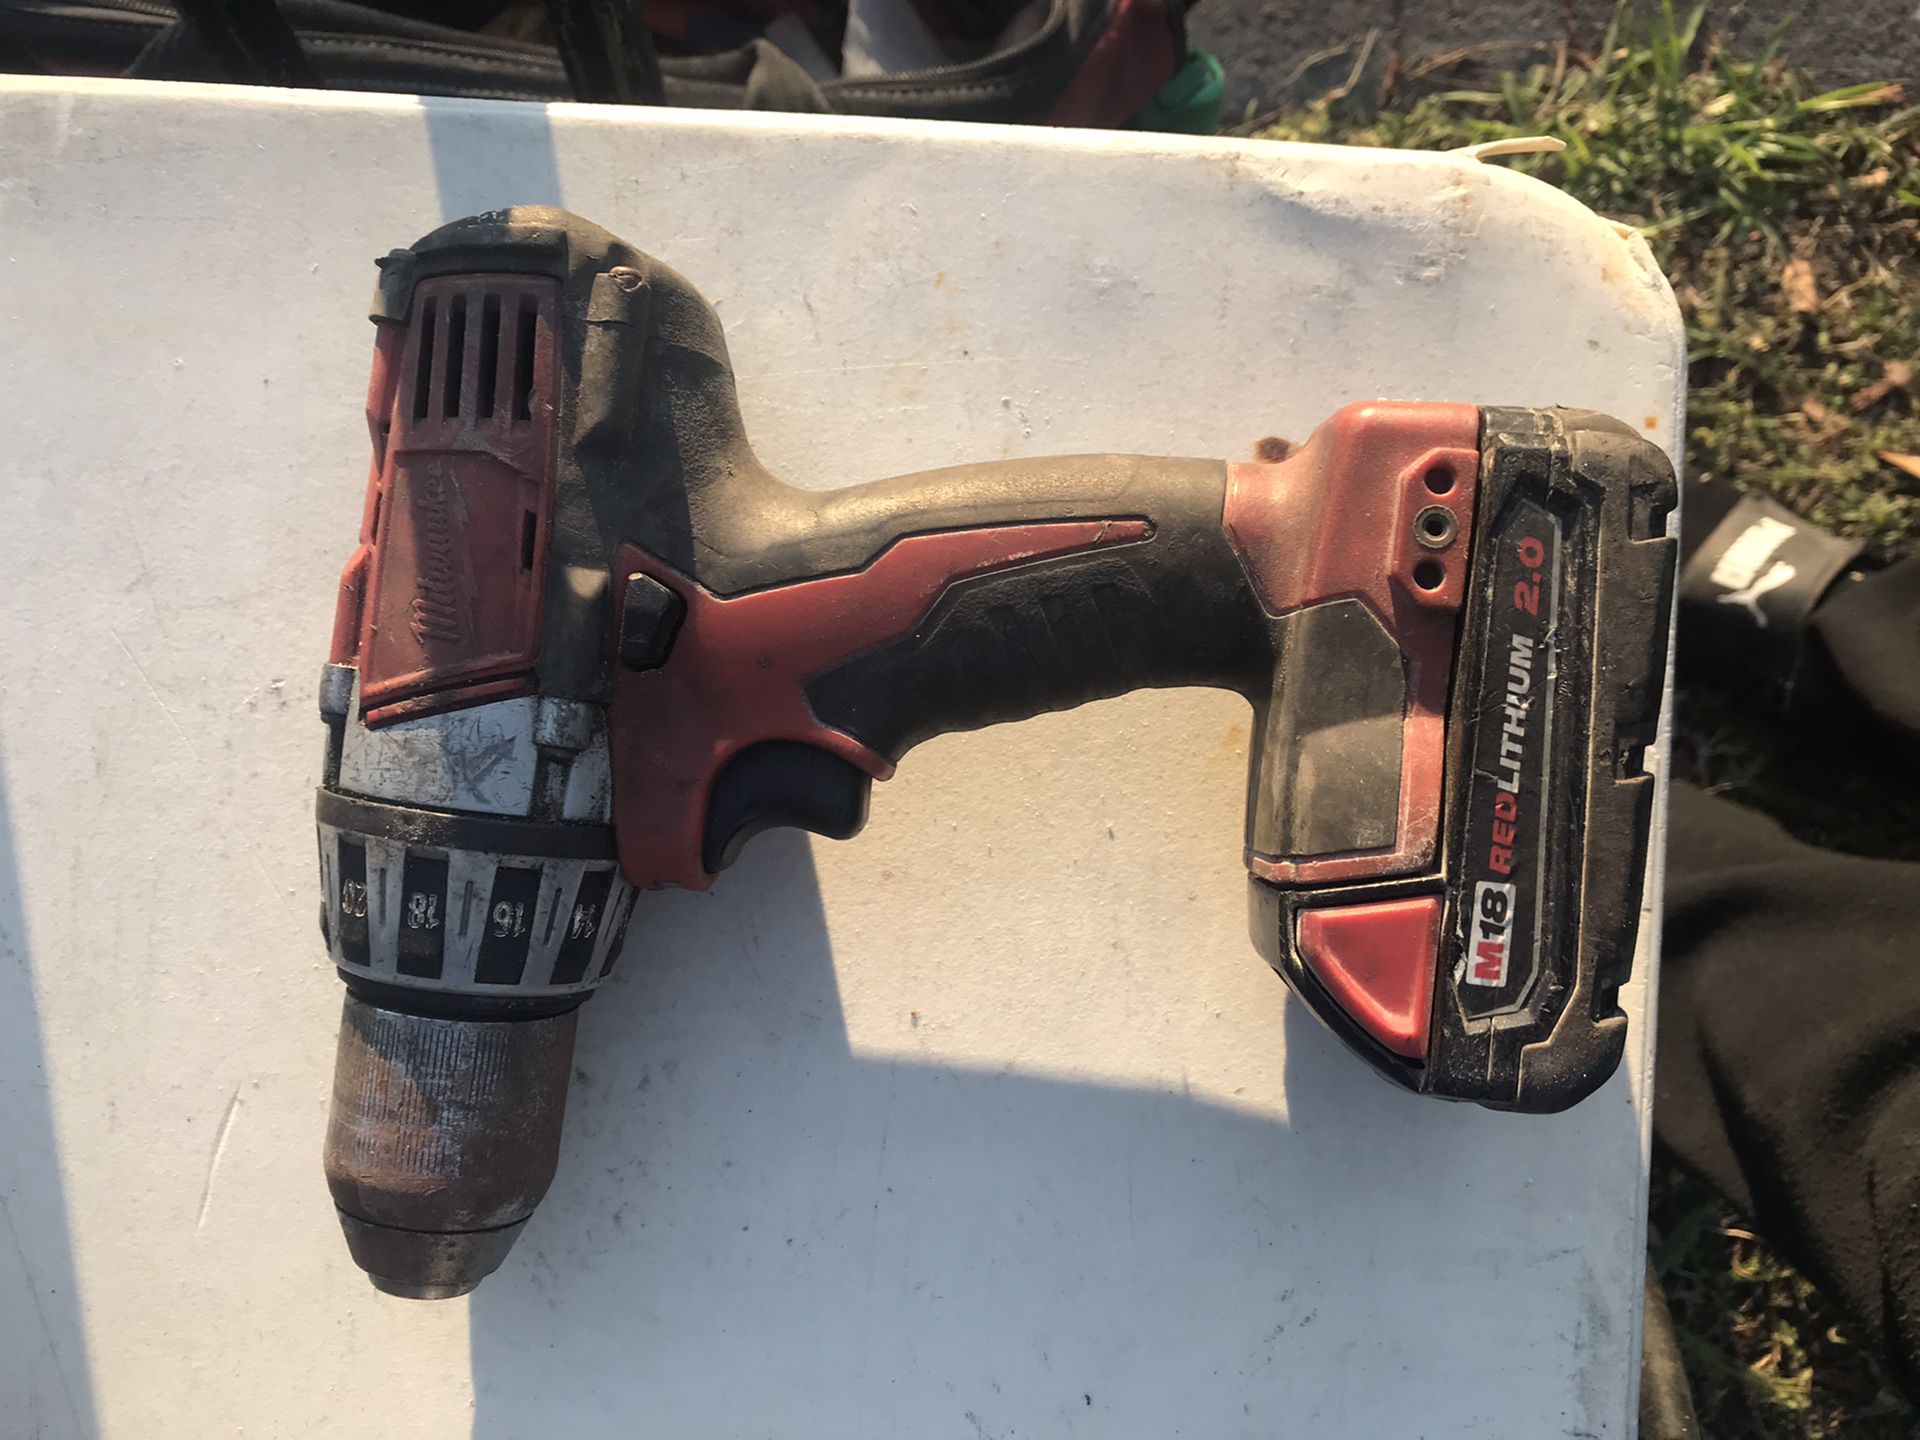 Milwaukee drill needs charger